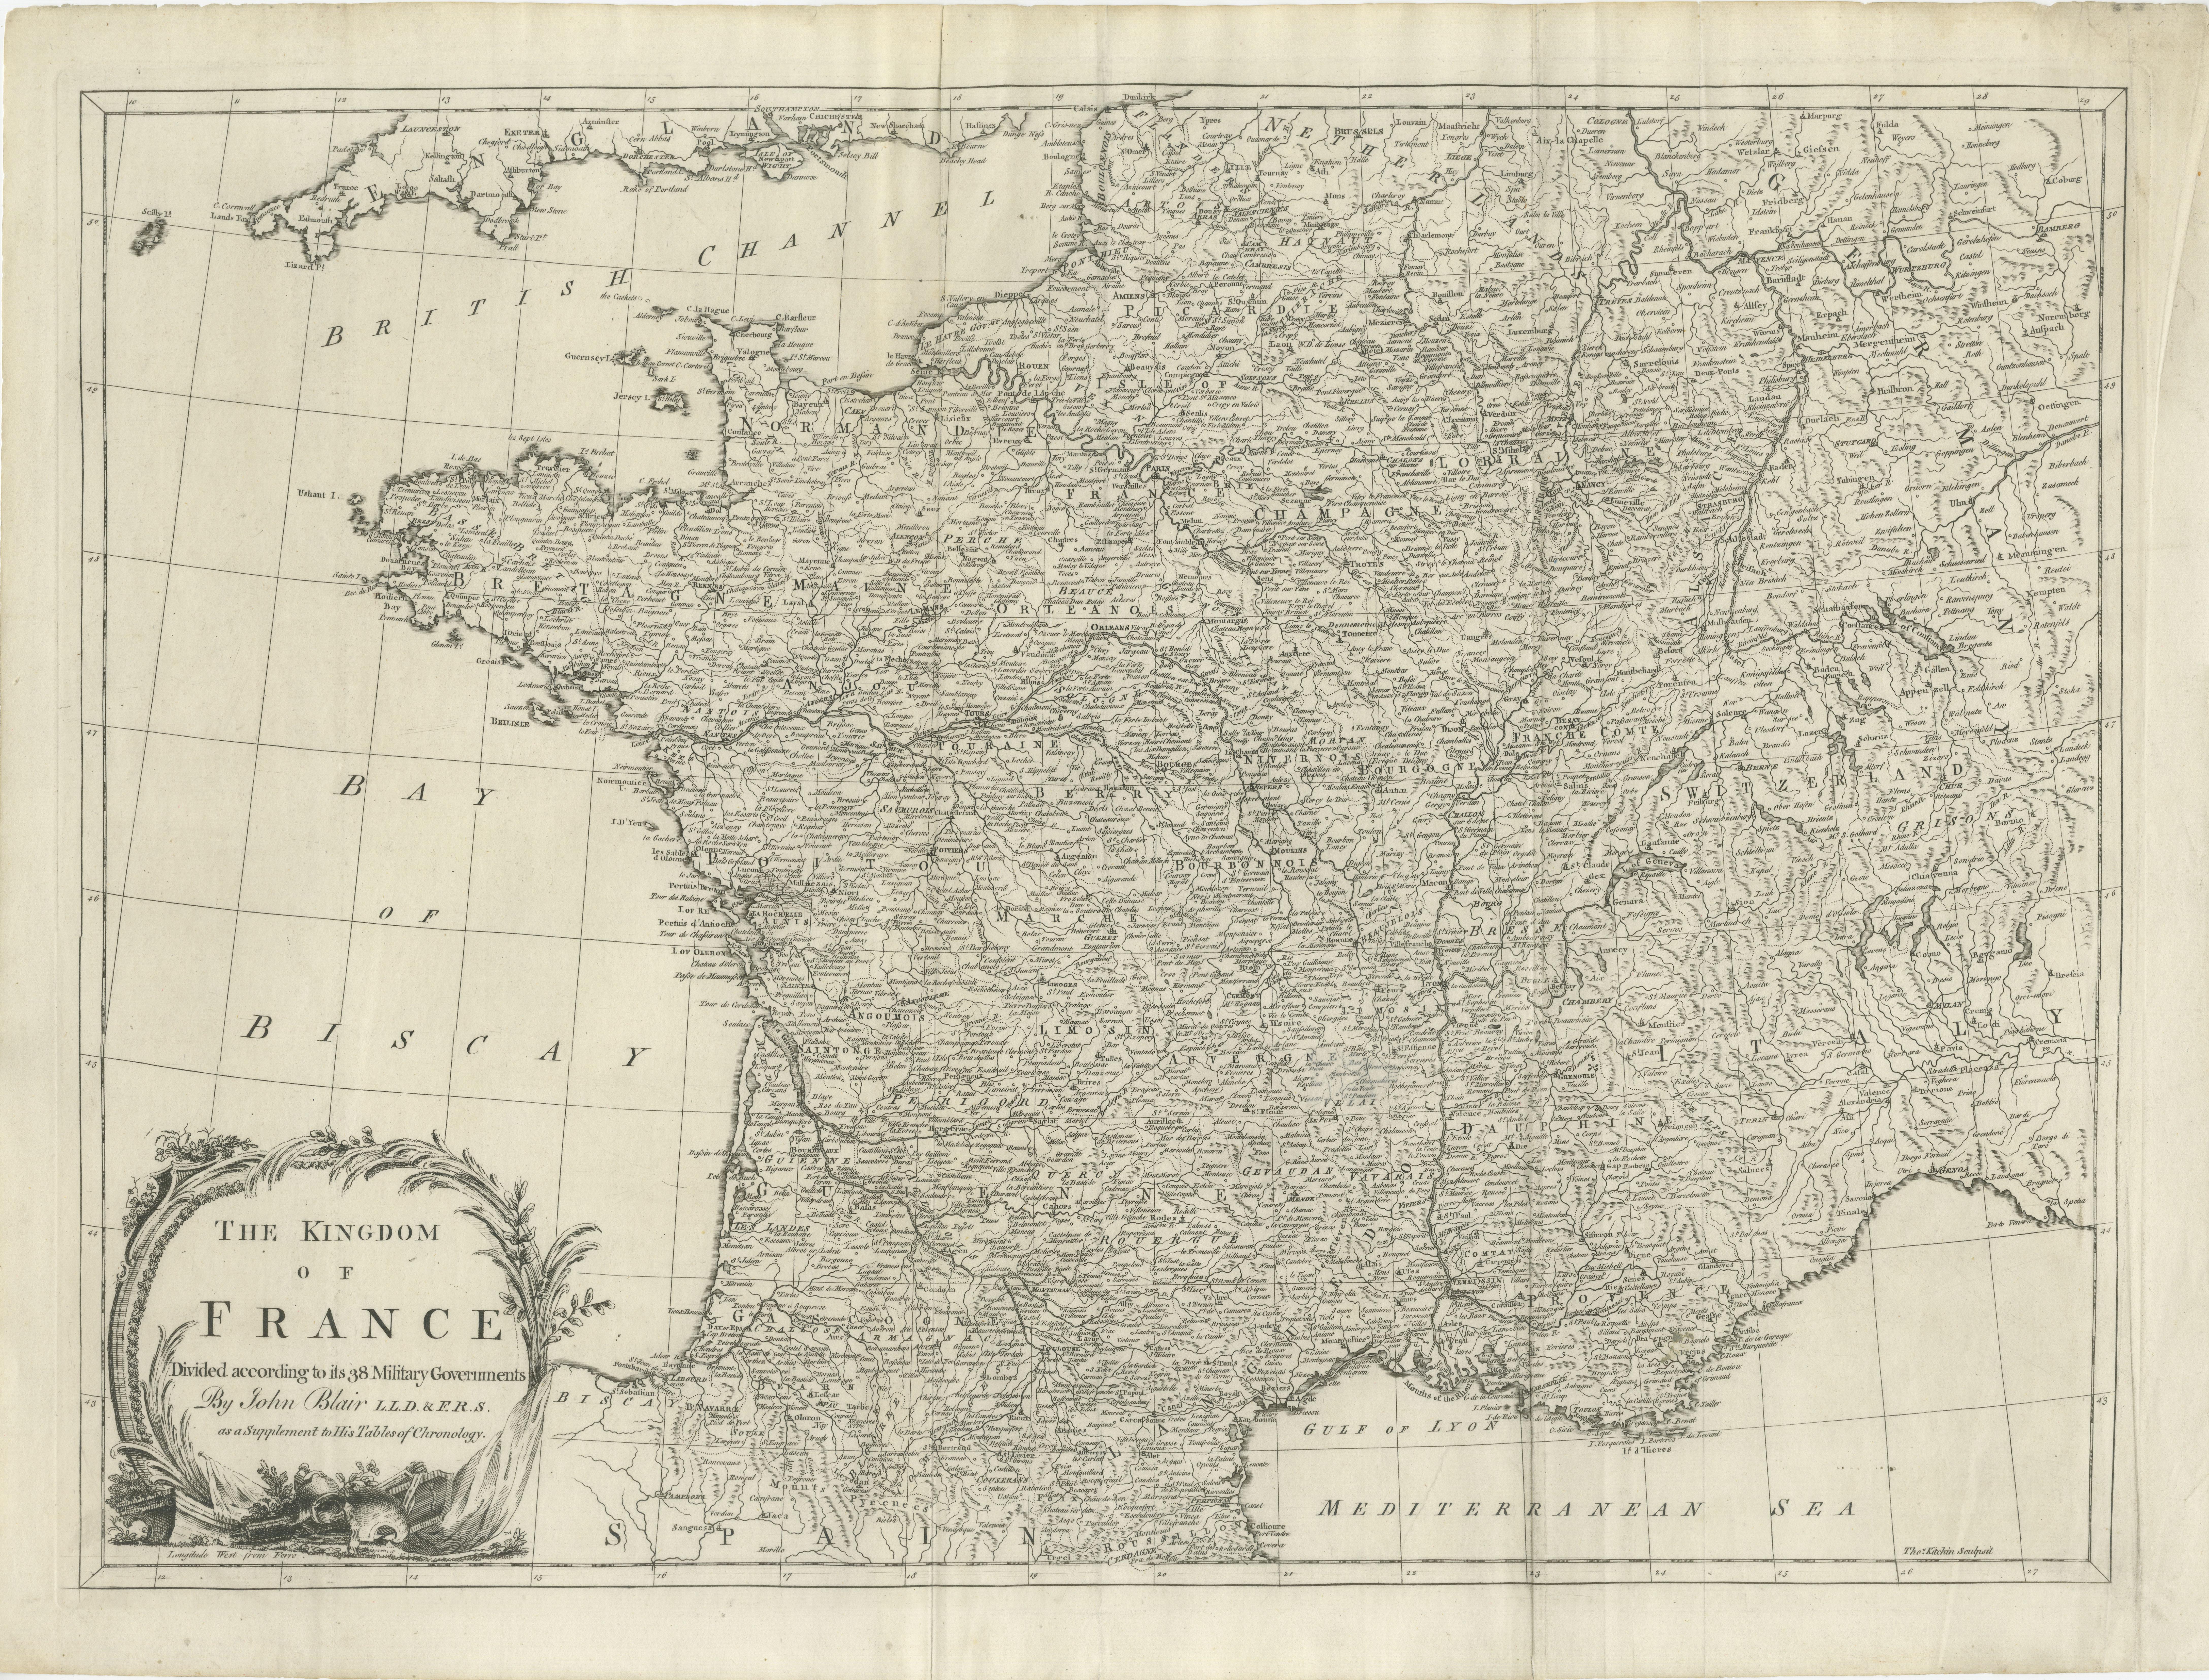 Antique map titled 'The Kingdom of France (..)'. Large antique map of the Kingdom of France. Engraved by T. Kitchin. Published J. Blair, circa 1779.